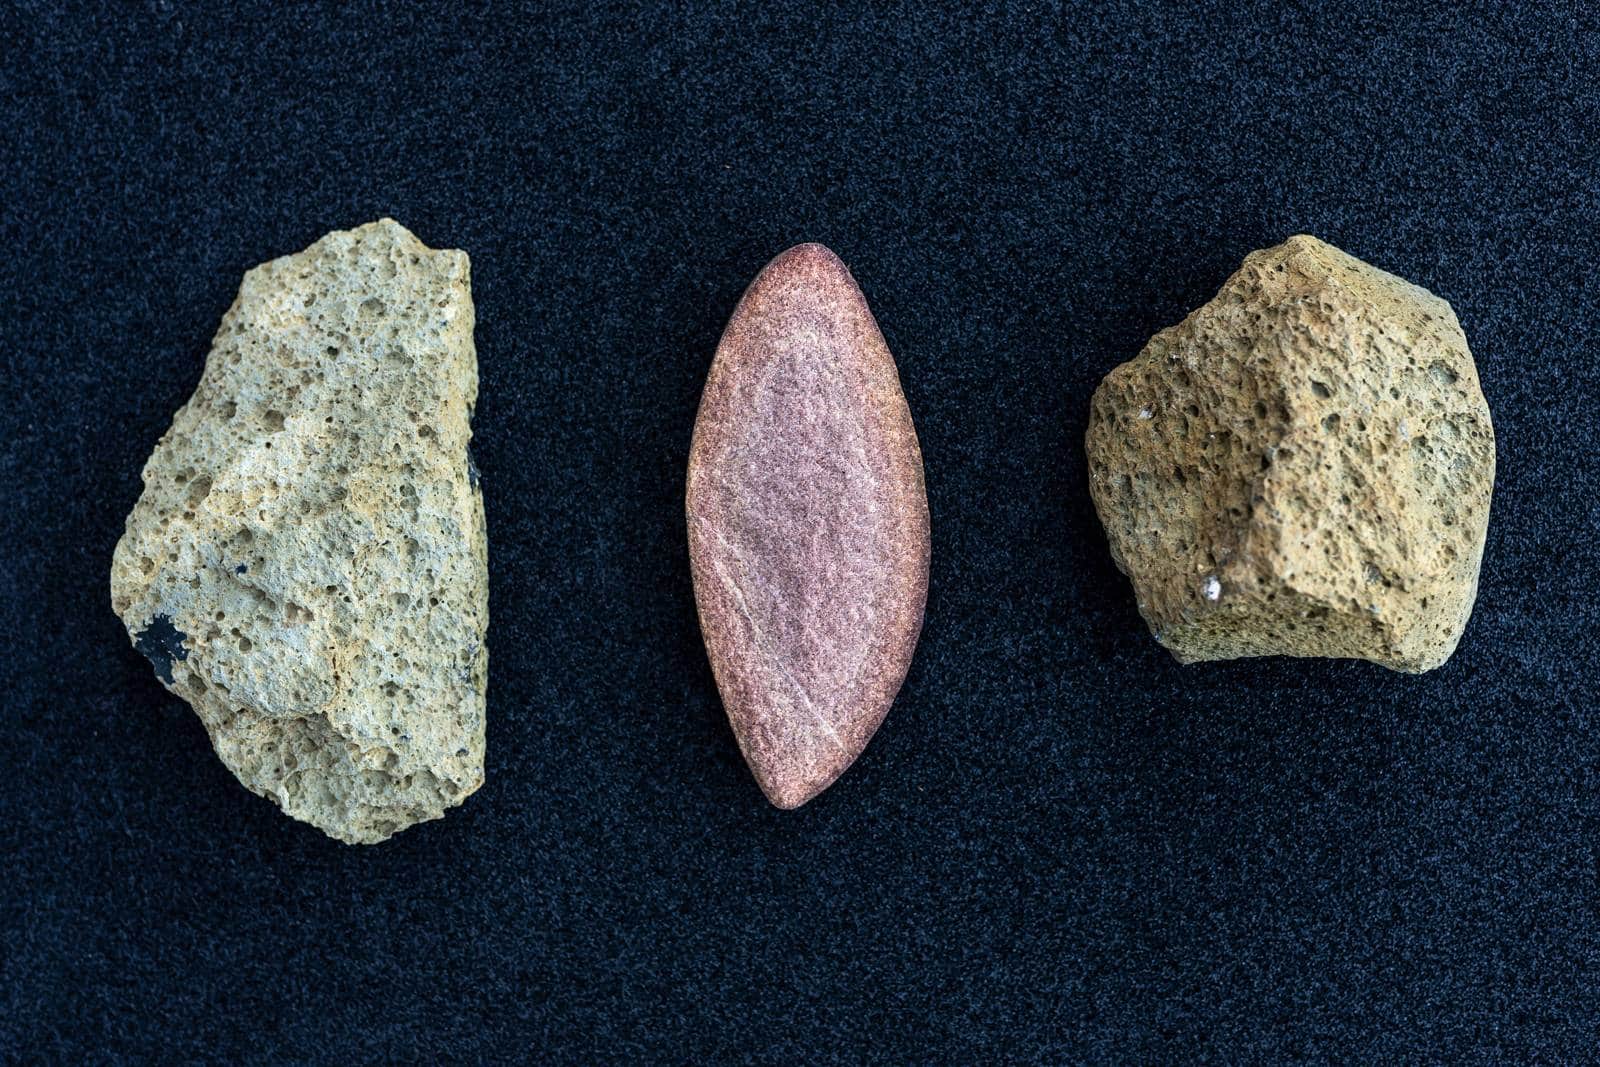 The oldest traces of human presence in Europe were discovered in Ukraine